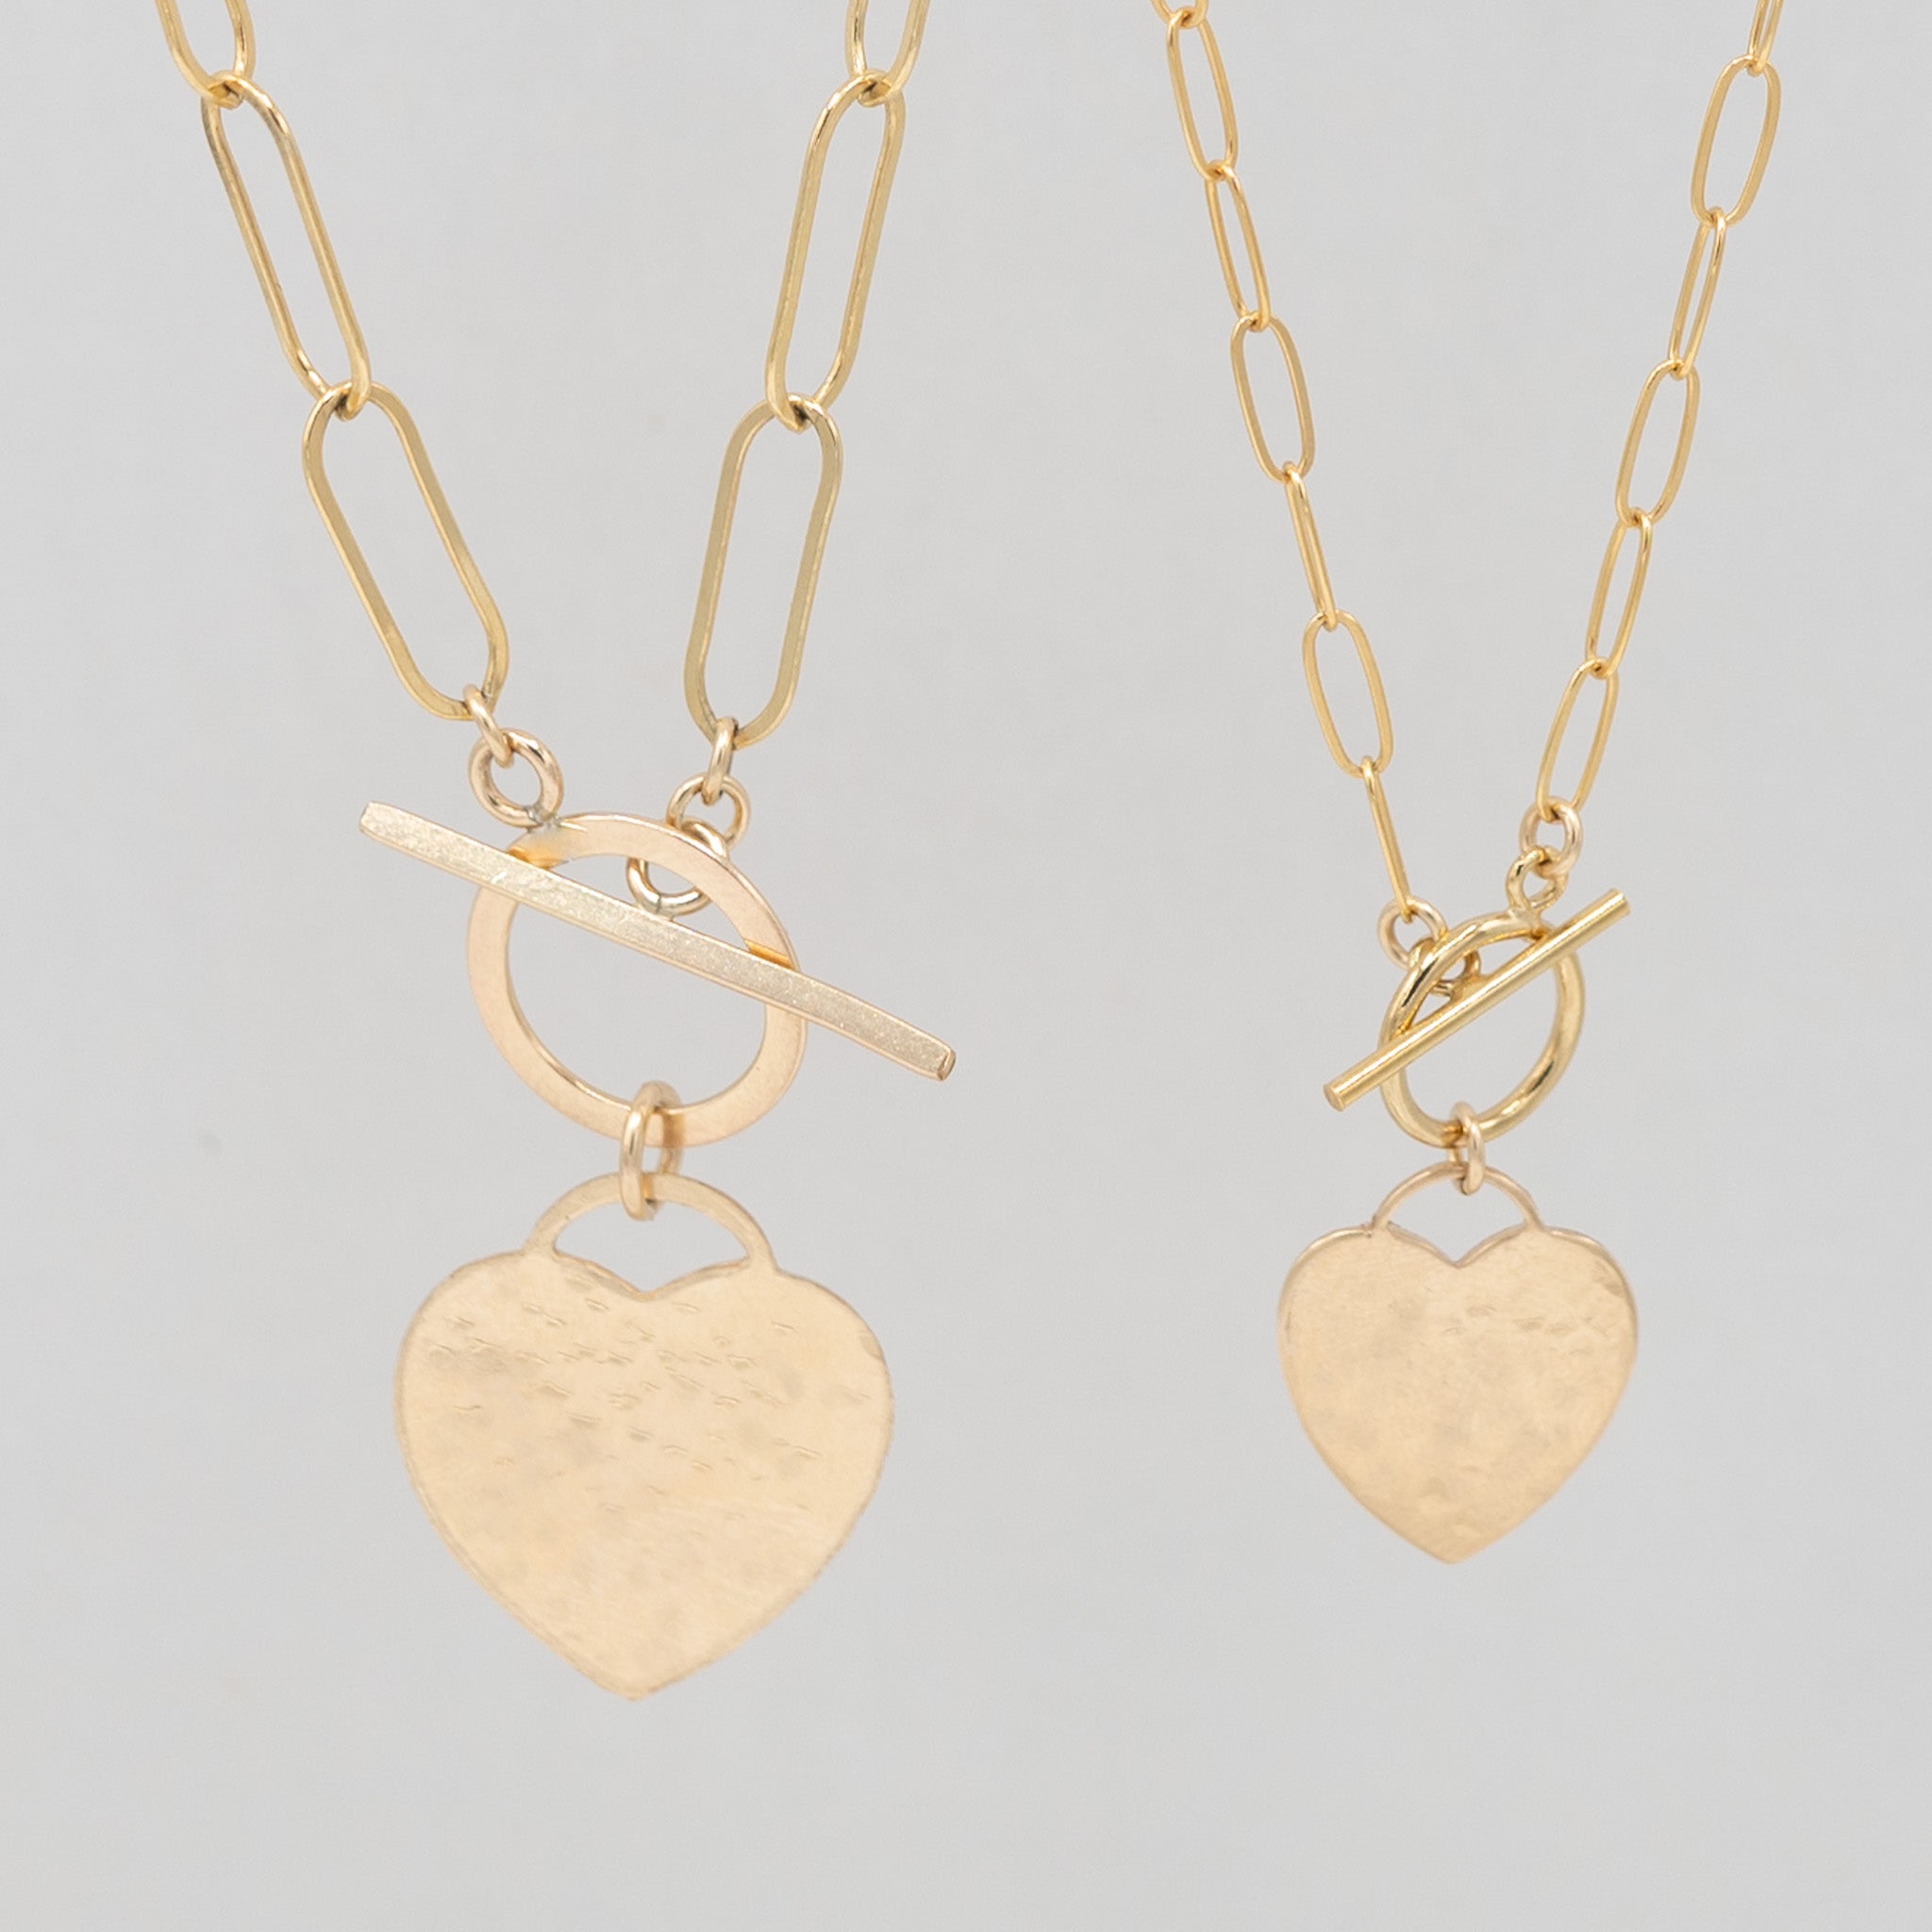 XL 14k Gold Filled Heart Toggle Necklace